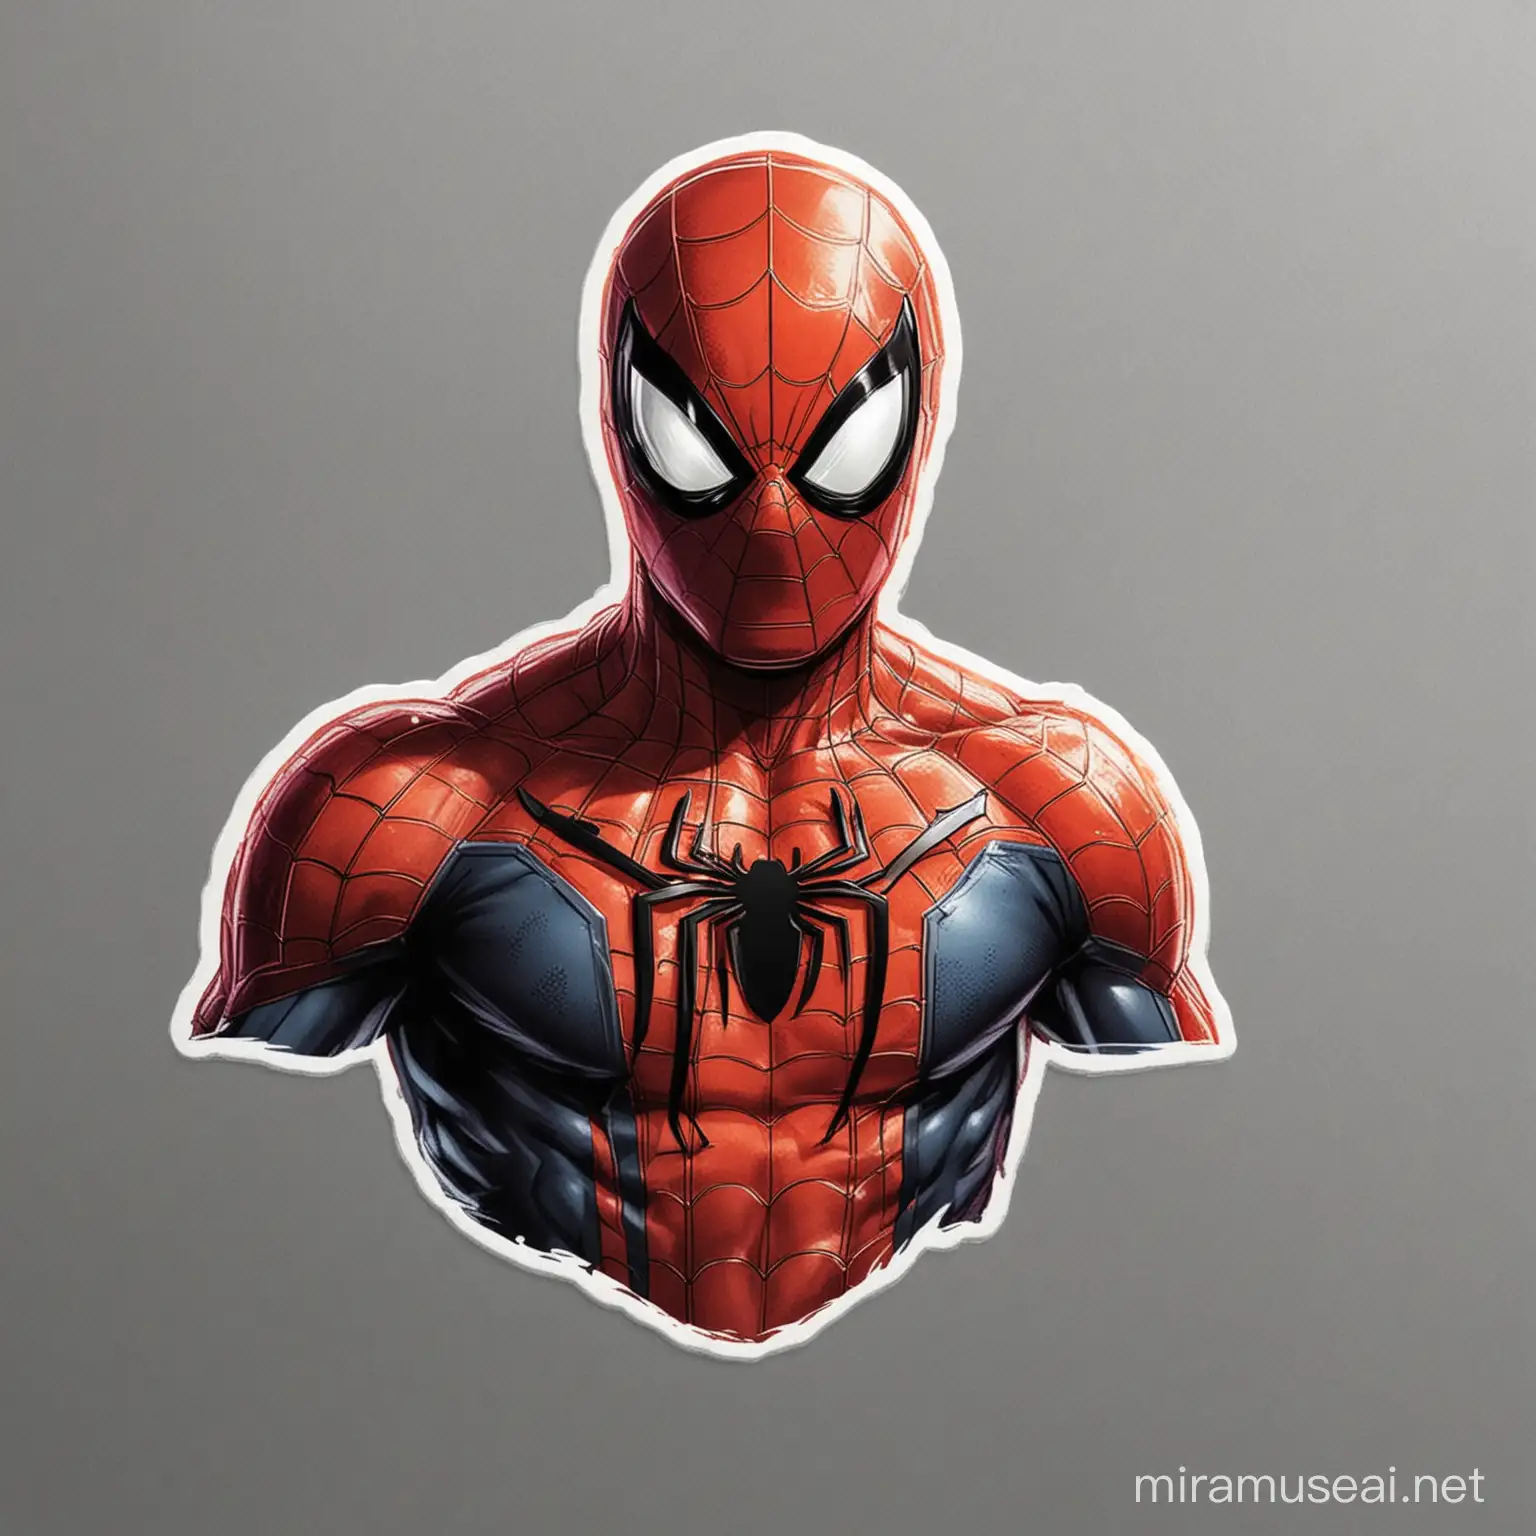 generate a sticker type image of spiderman 